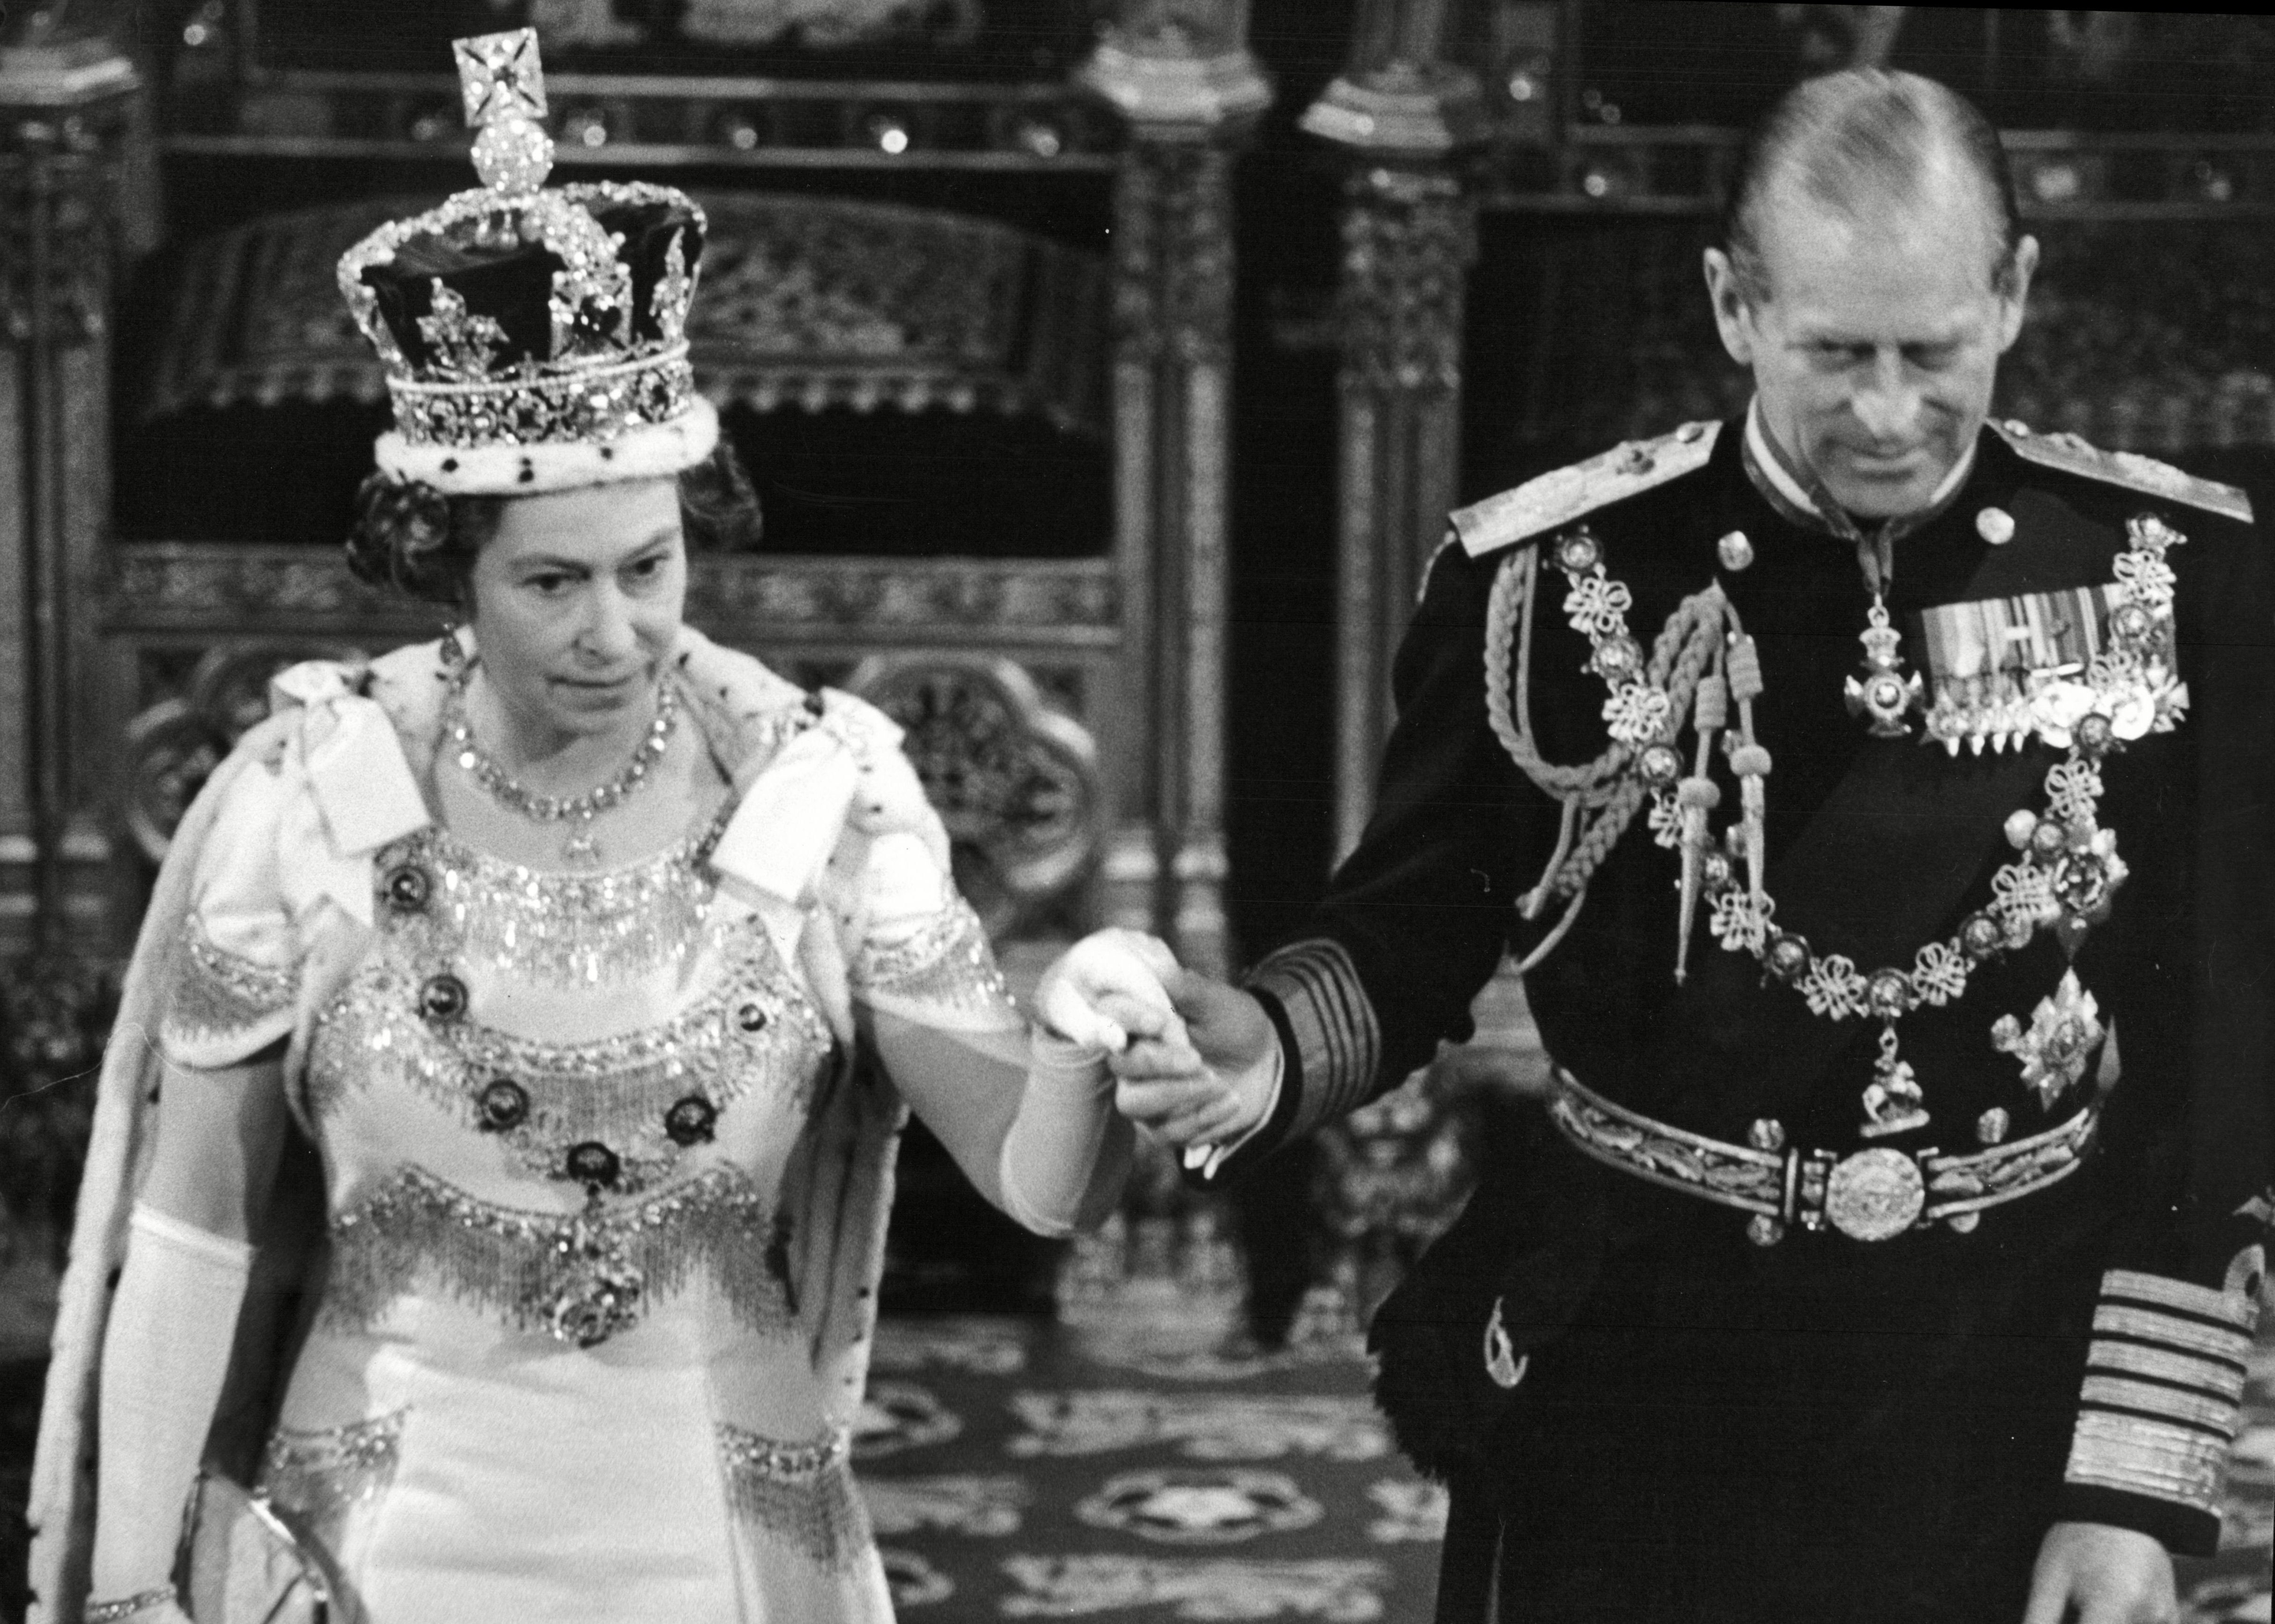 Mandatory Credit: Photo by Geoffrey White/ANL/Shutterstock (1477922a) Queen Elizabeth II And Prince Philip At House Of Lords For State Opening Of Parliament 1978. Queen Elizabeth Ii And Prince Philip At House Of Lords For State Opening Of Parliament 1978.